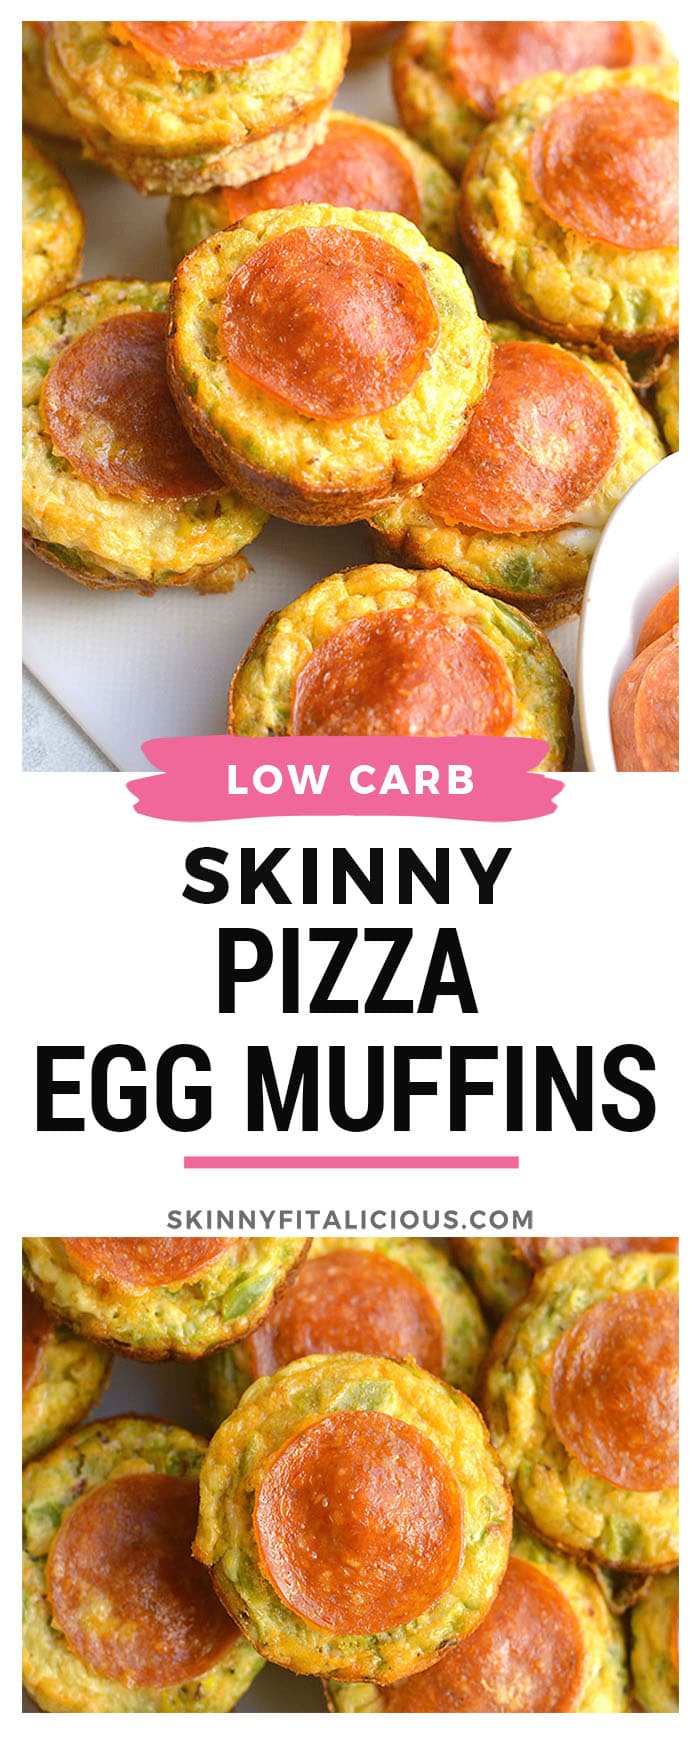 Skinny Pizza Egg Muffins! An easy recipe that makes a quick breakfast and healthy meal every morning. Packed with riced bell pepper and spices, these egg muffins are perfect for weekend meal prep. Wholesome, light and delicious! Gluten Free, Low Calorie, Paleo, Low Carb